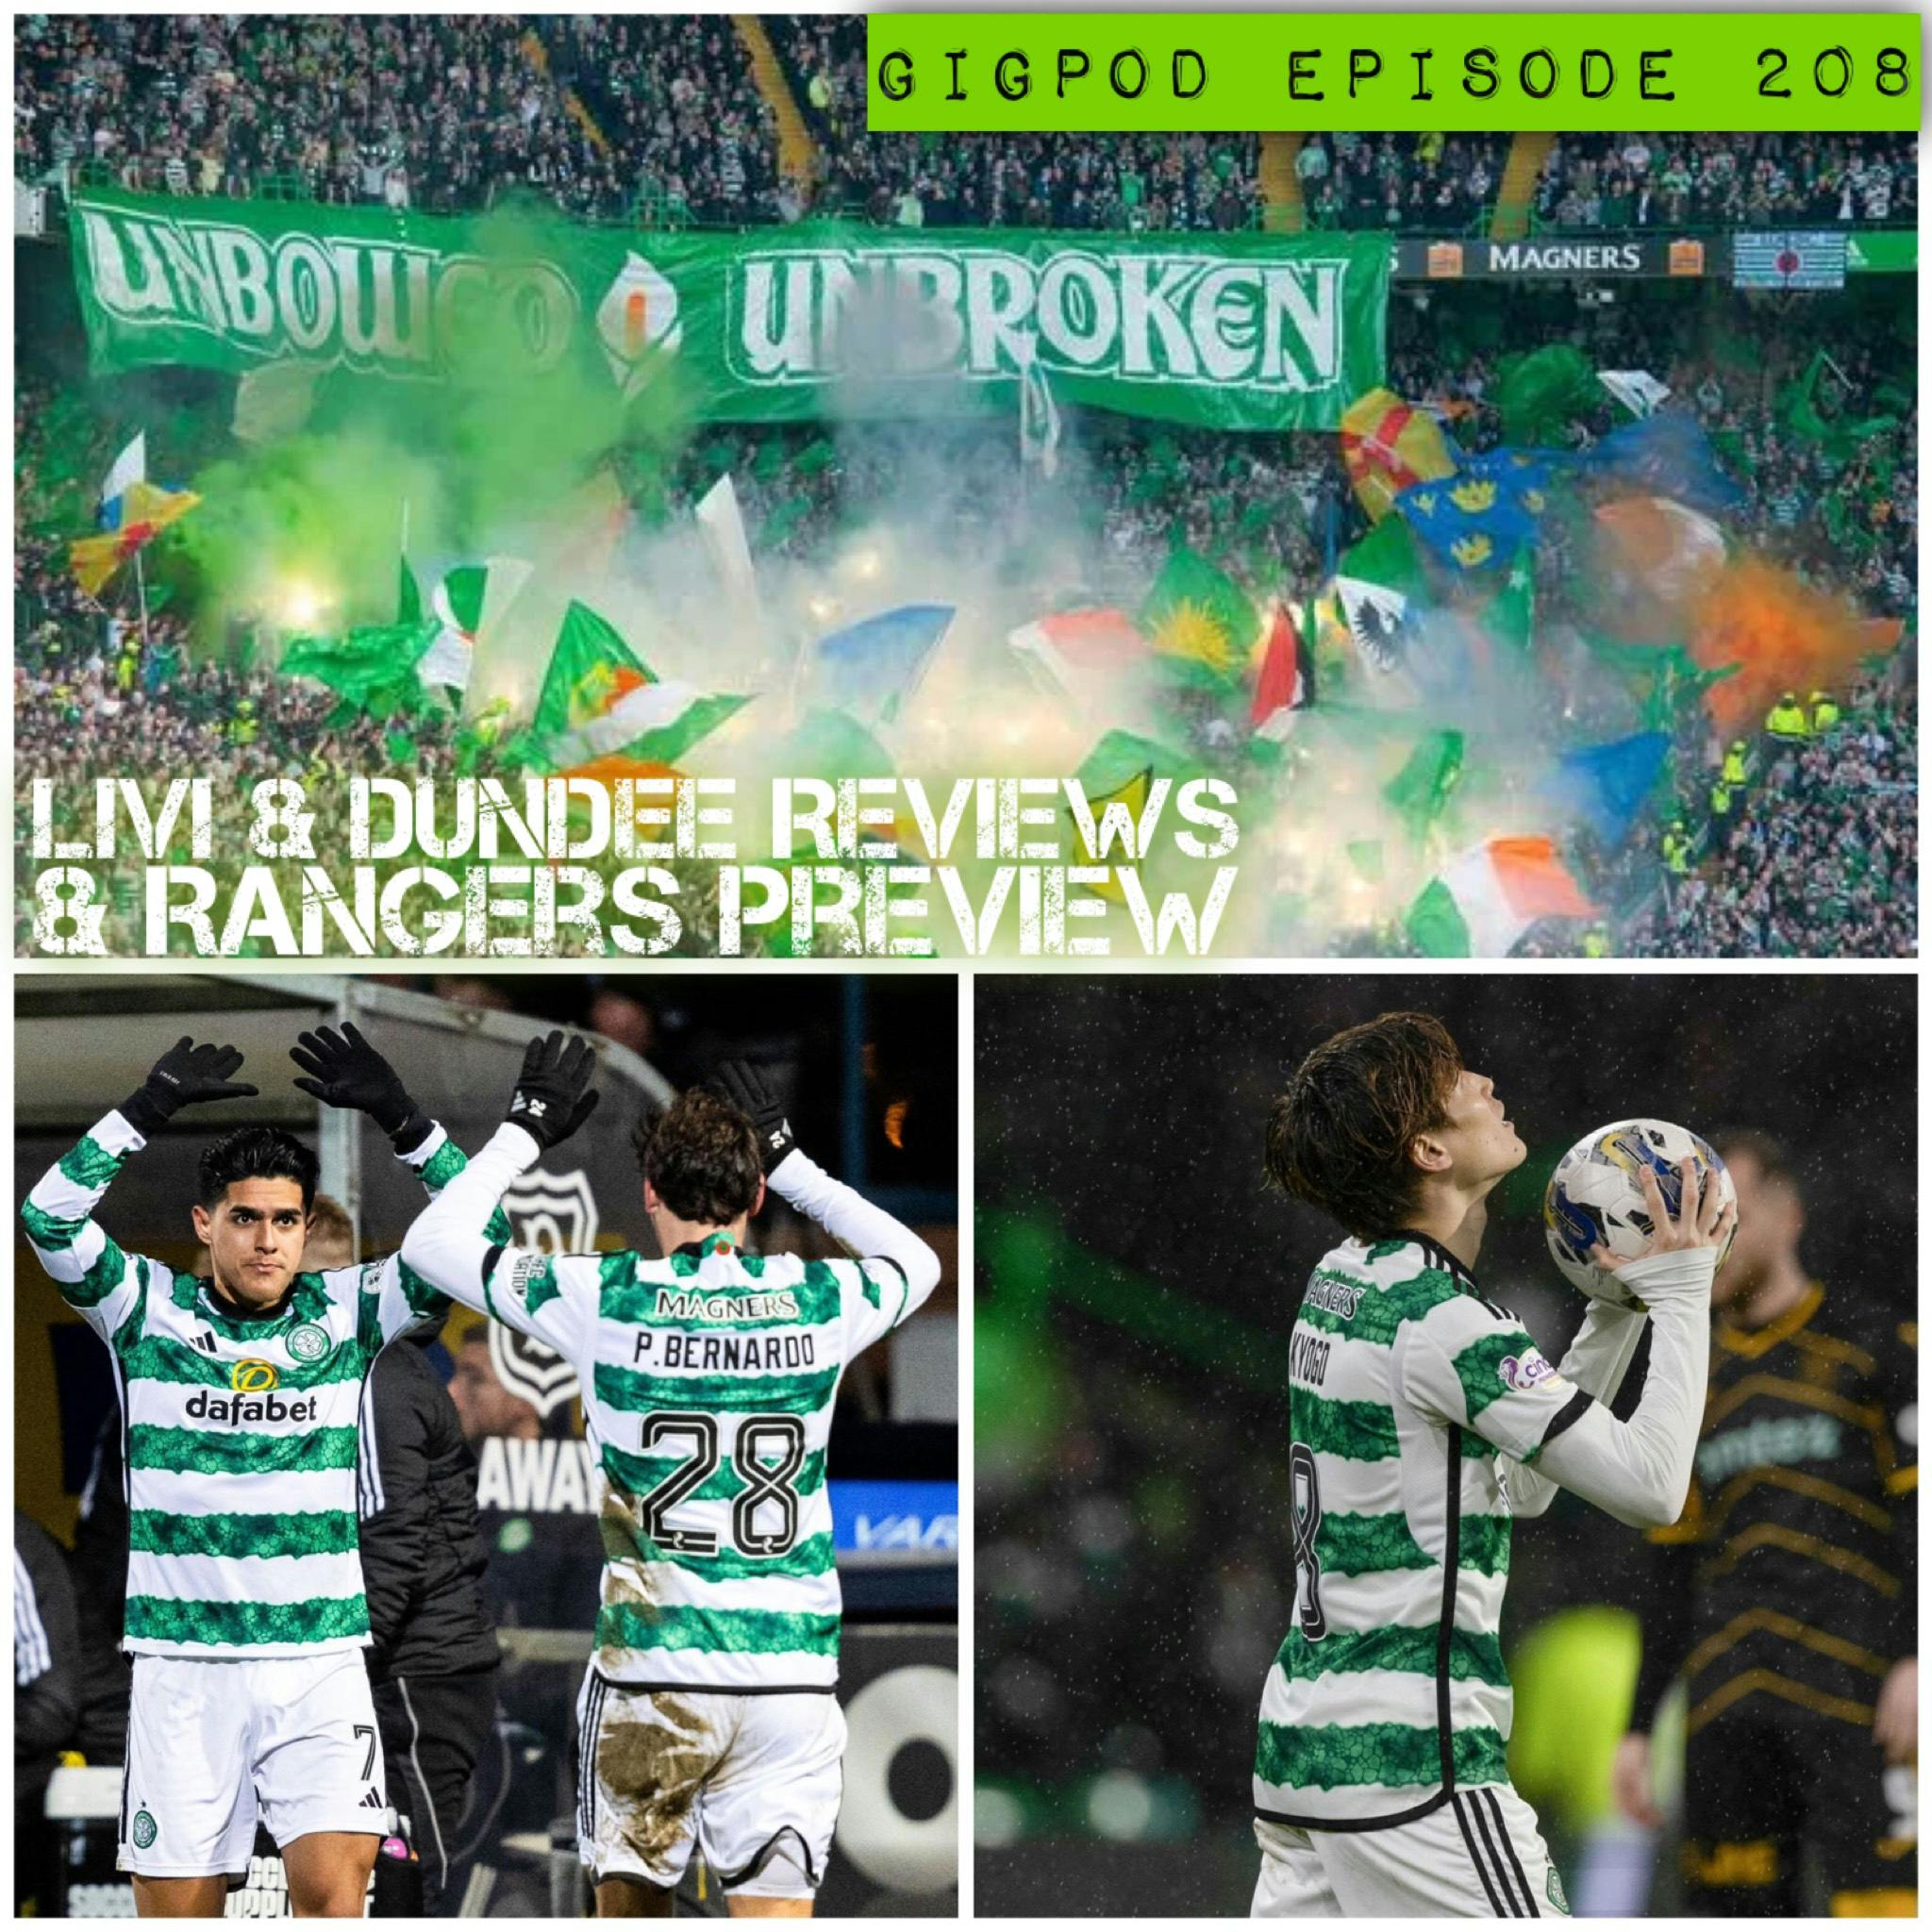 GIGPOD EP 208: LIVI & DUNDEE REVIEWS & RANGERS PREVIEW